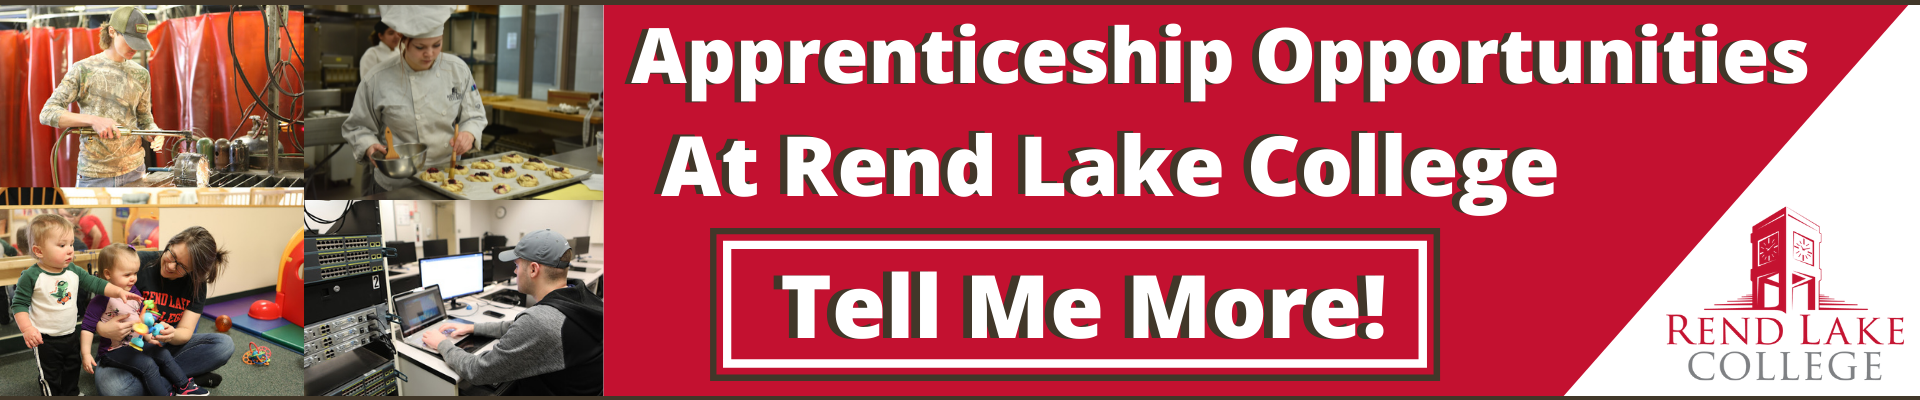 Tell Me More About Apprenticeship Opportunities At RLC 1